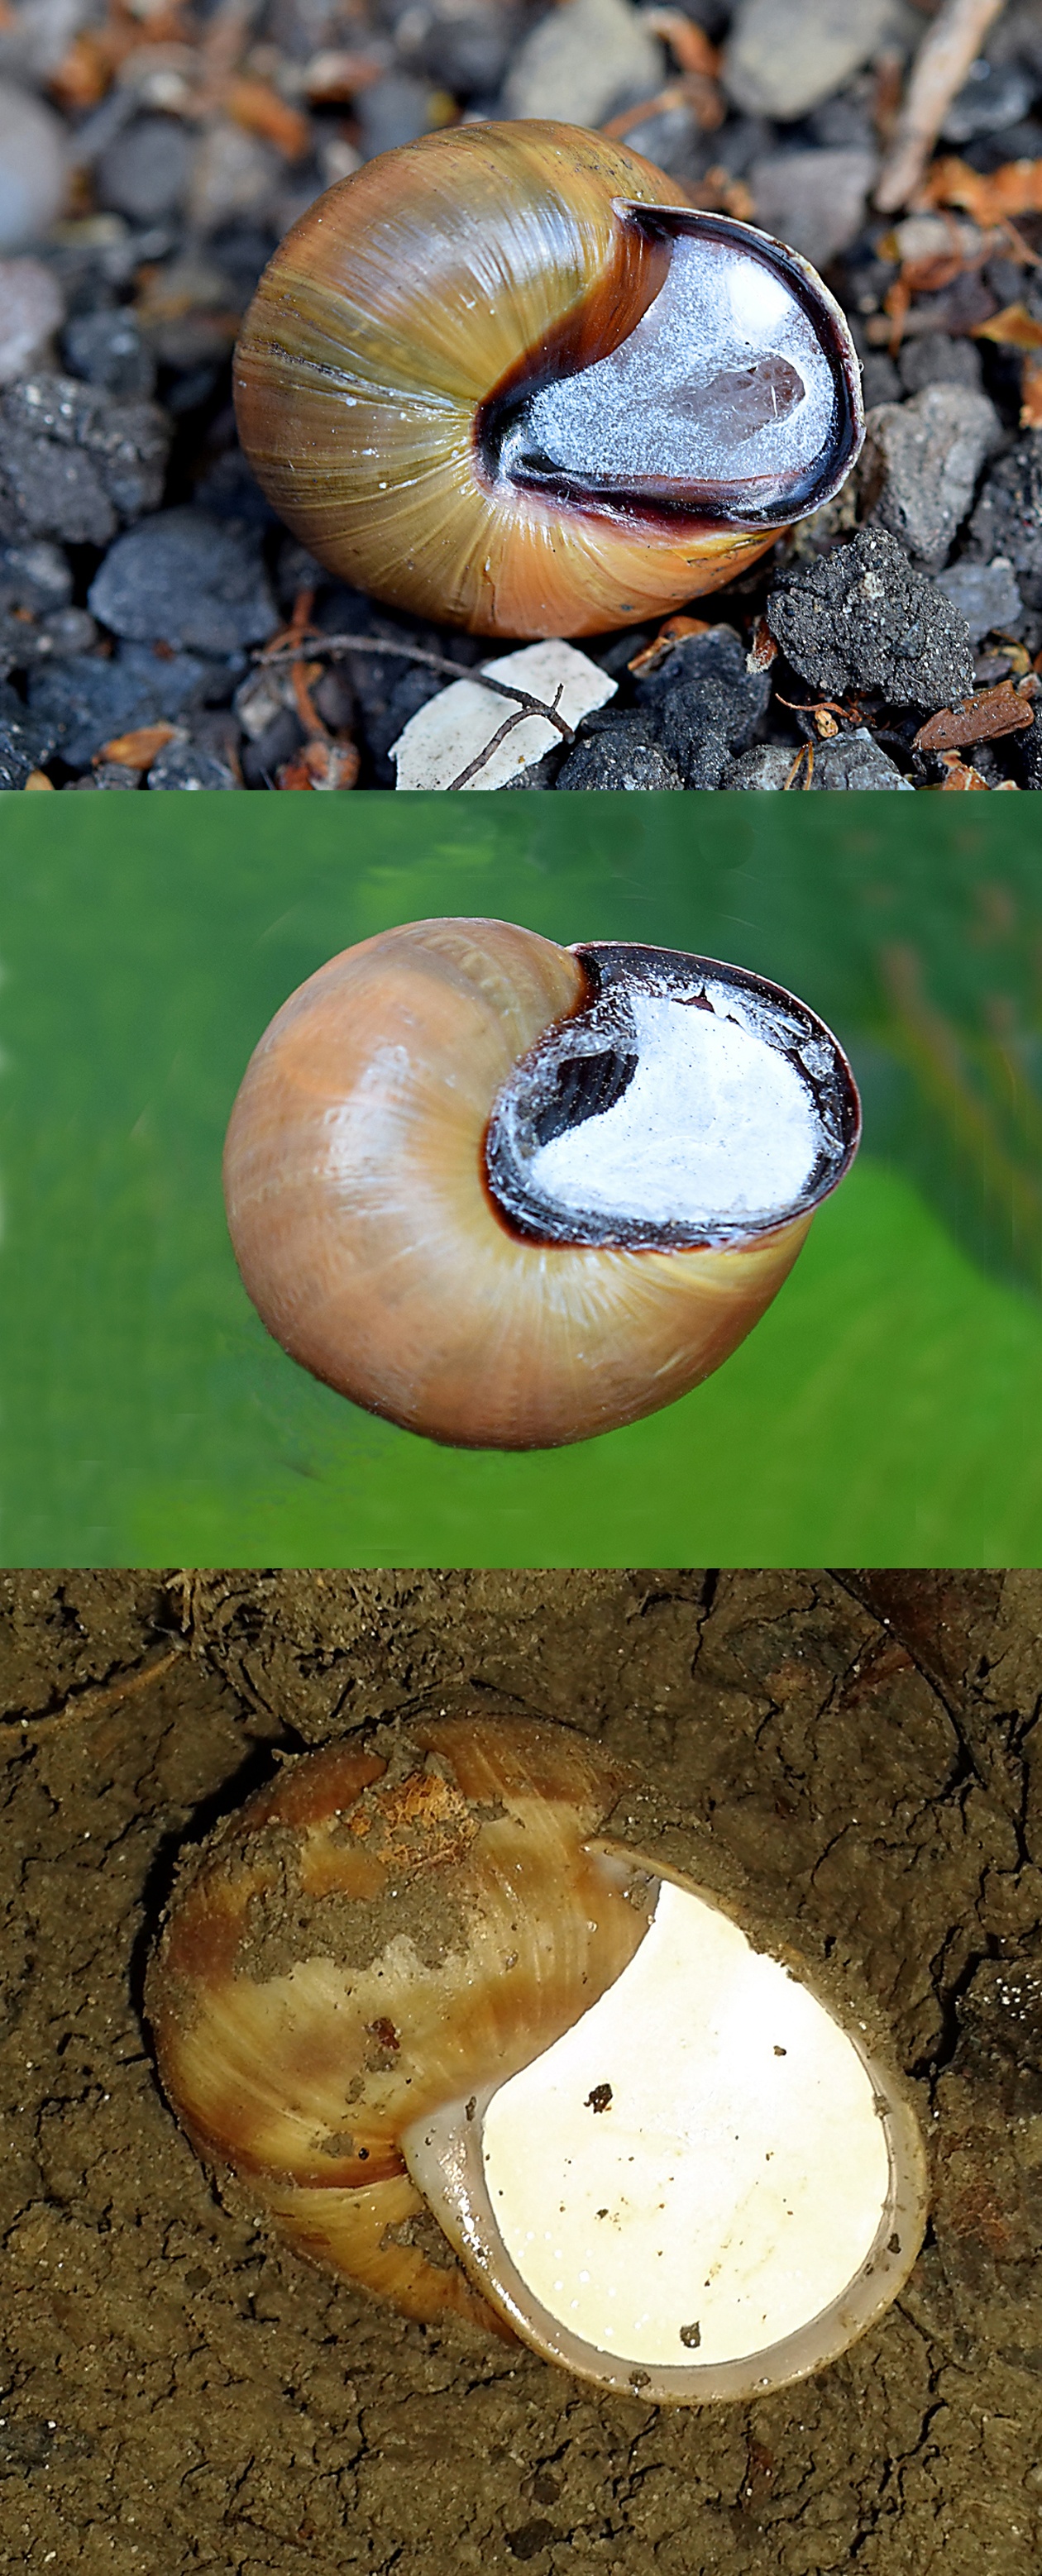 What happens to snails in the winter?